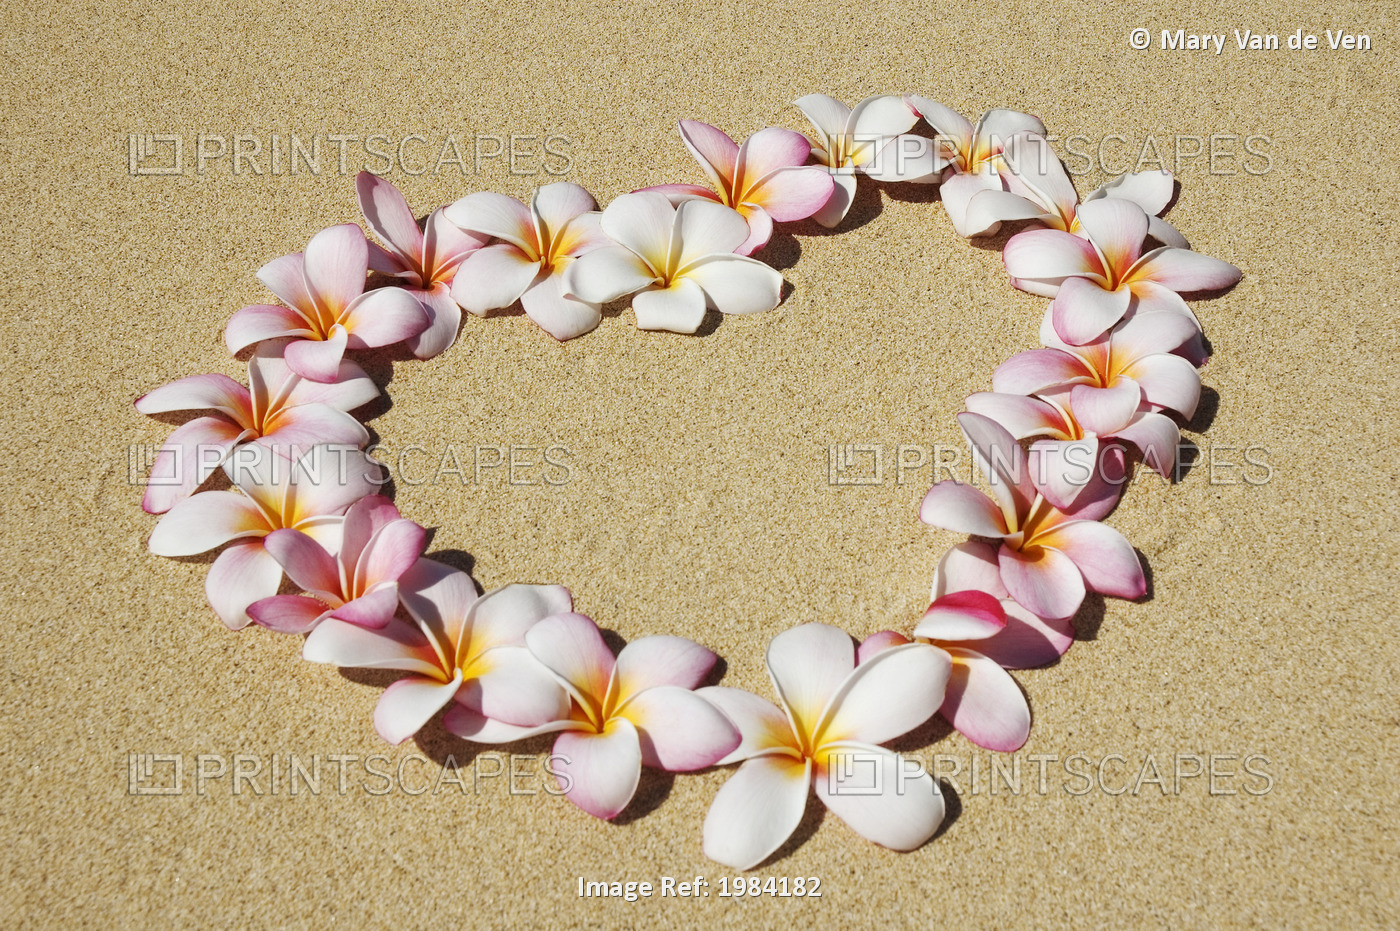 Pink And White Plumeria Blossoms Arranged In Heart On Sand.